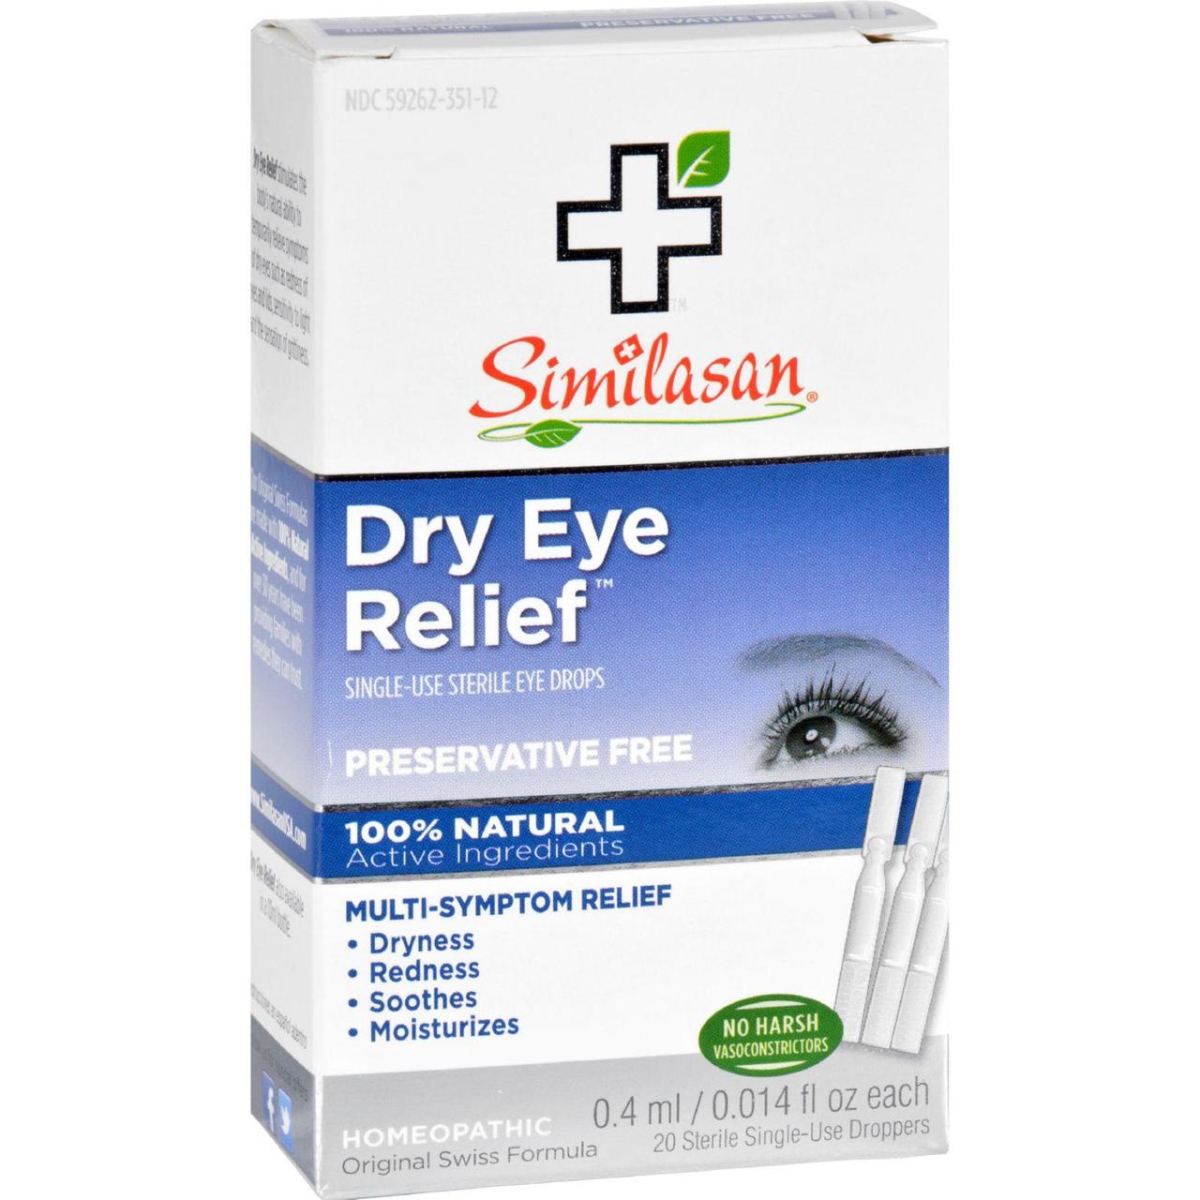 Hg0946814 Dry Eye Relief - 20 Sterile Single Use Droppers